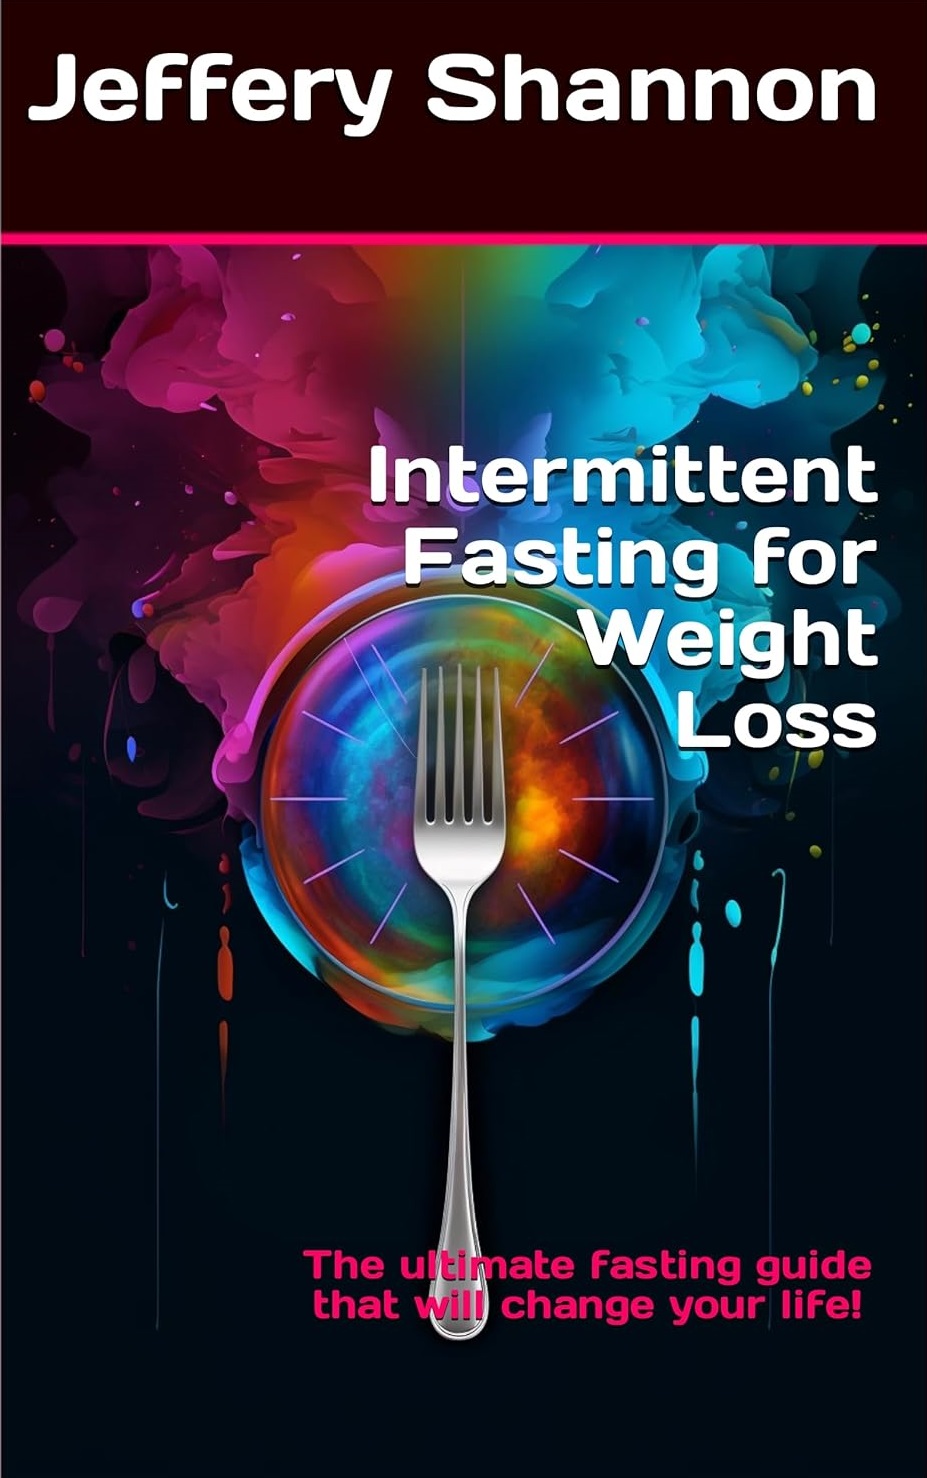 Jeffery Shannon Releases New Book About His Health Journey With Intermittent Fasting 